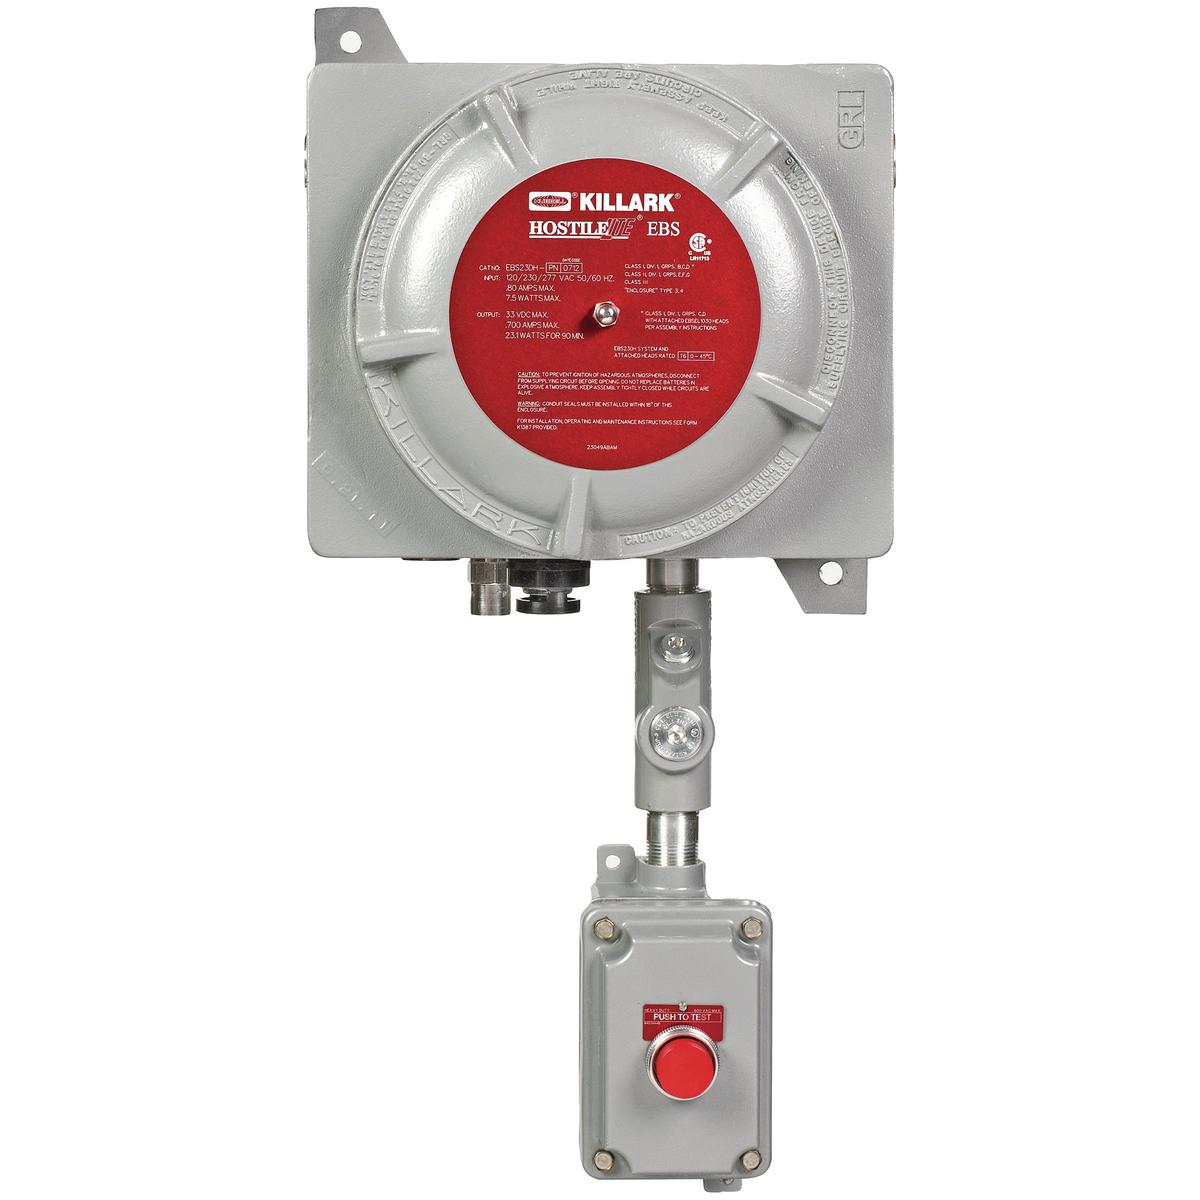 Hubbell EBS23DH-RNN The EBS Series Explosion Proof LED Emergency Battery Backup System is designed for egress or anti-panic applications. This fixture is made with a cast copper-free aluminum housing and fixture heads that are powder epoxy powder coat painted for extra corro